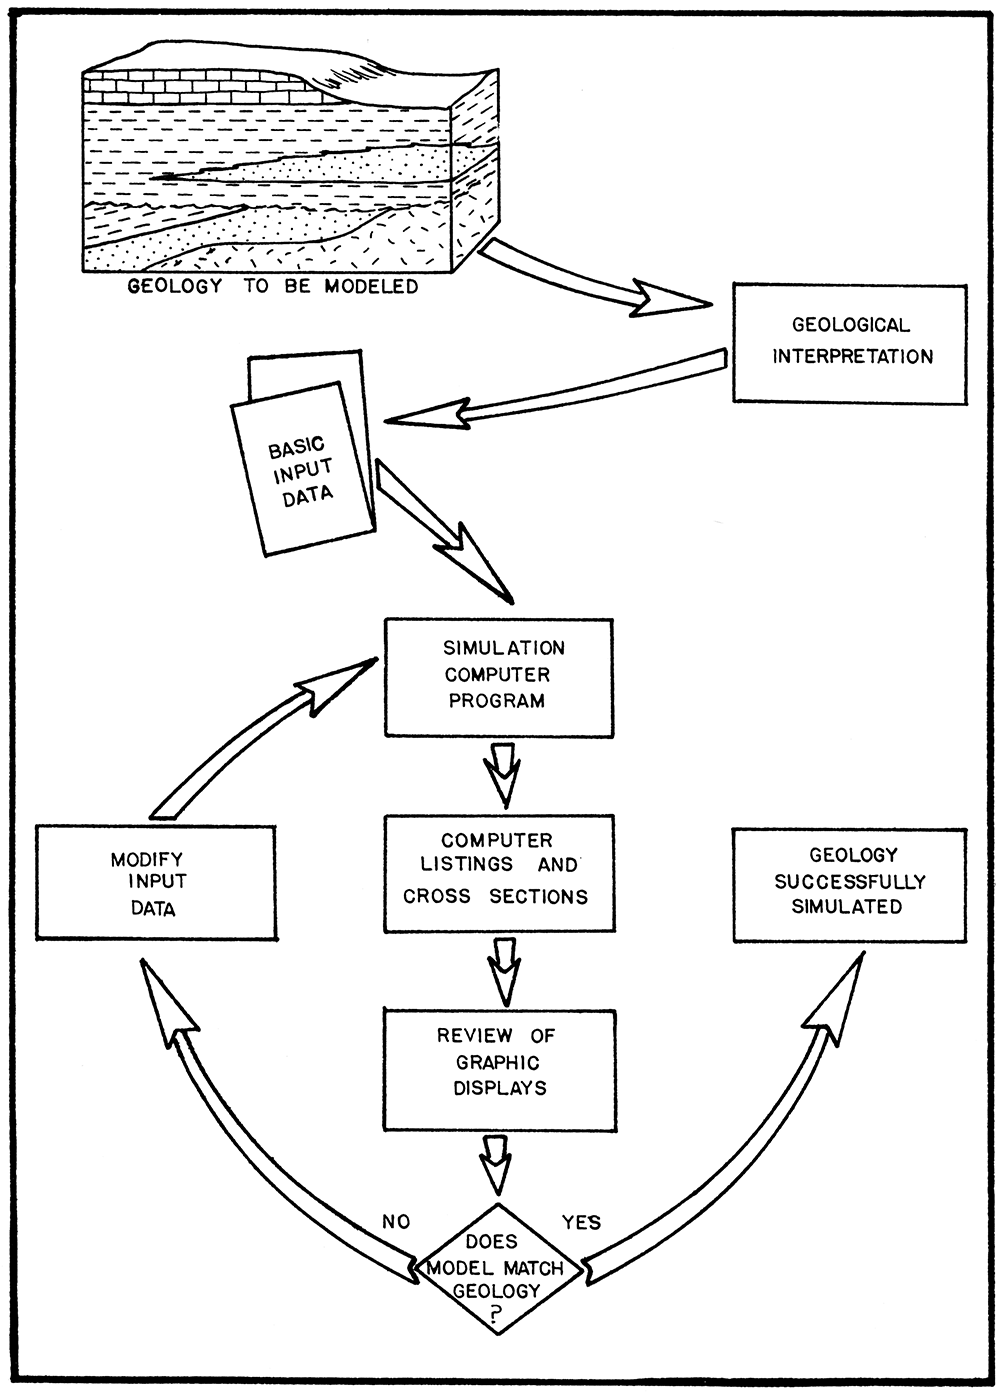 Graphical representation of steps followed in modeling with computer program. 